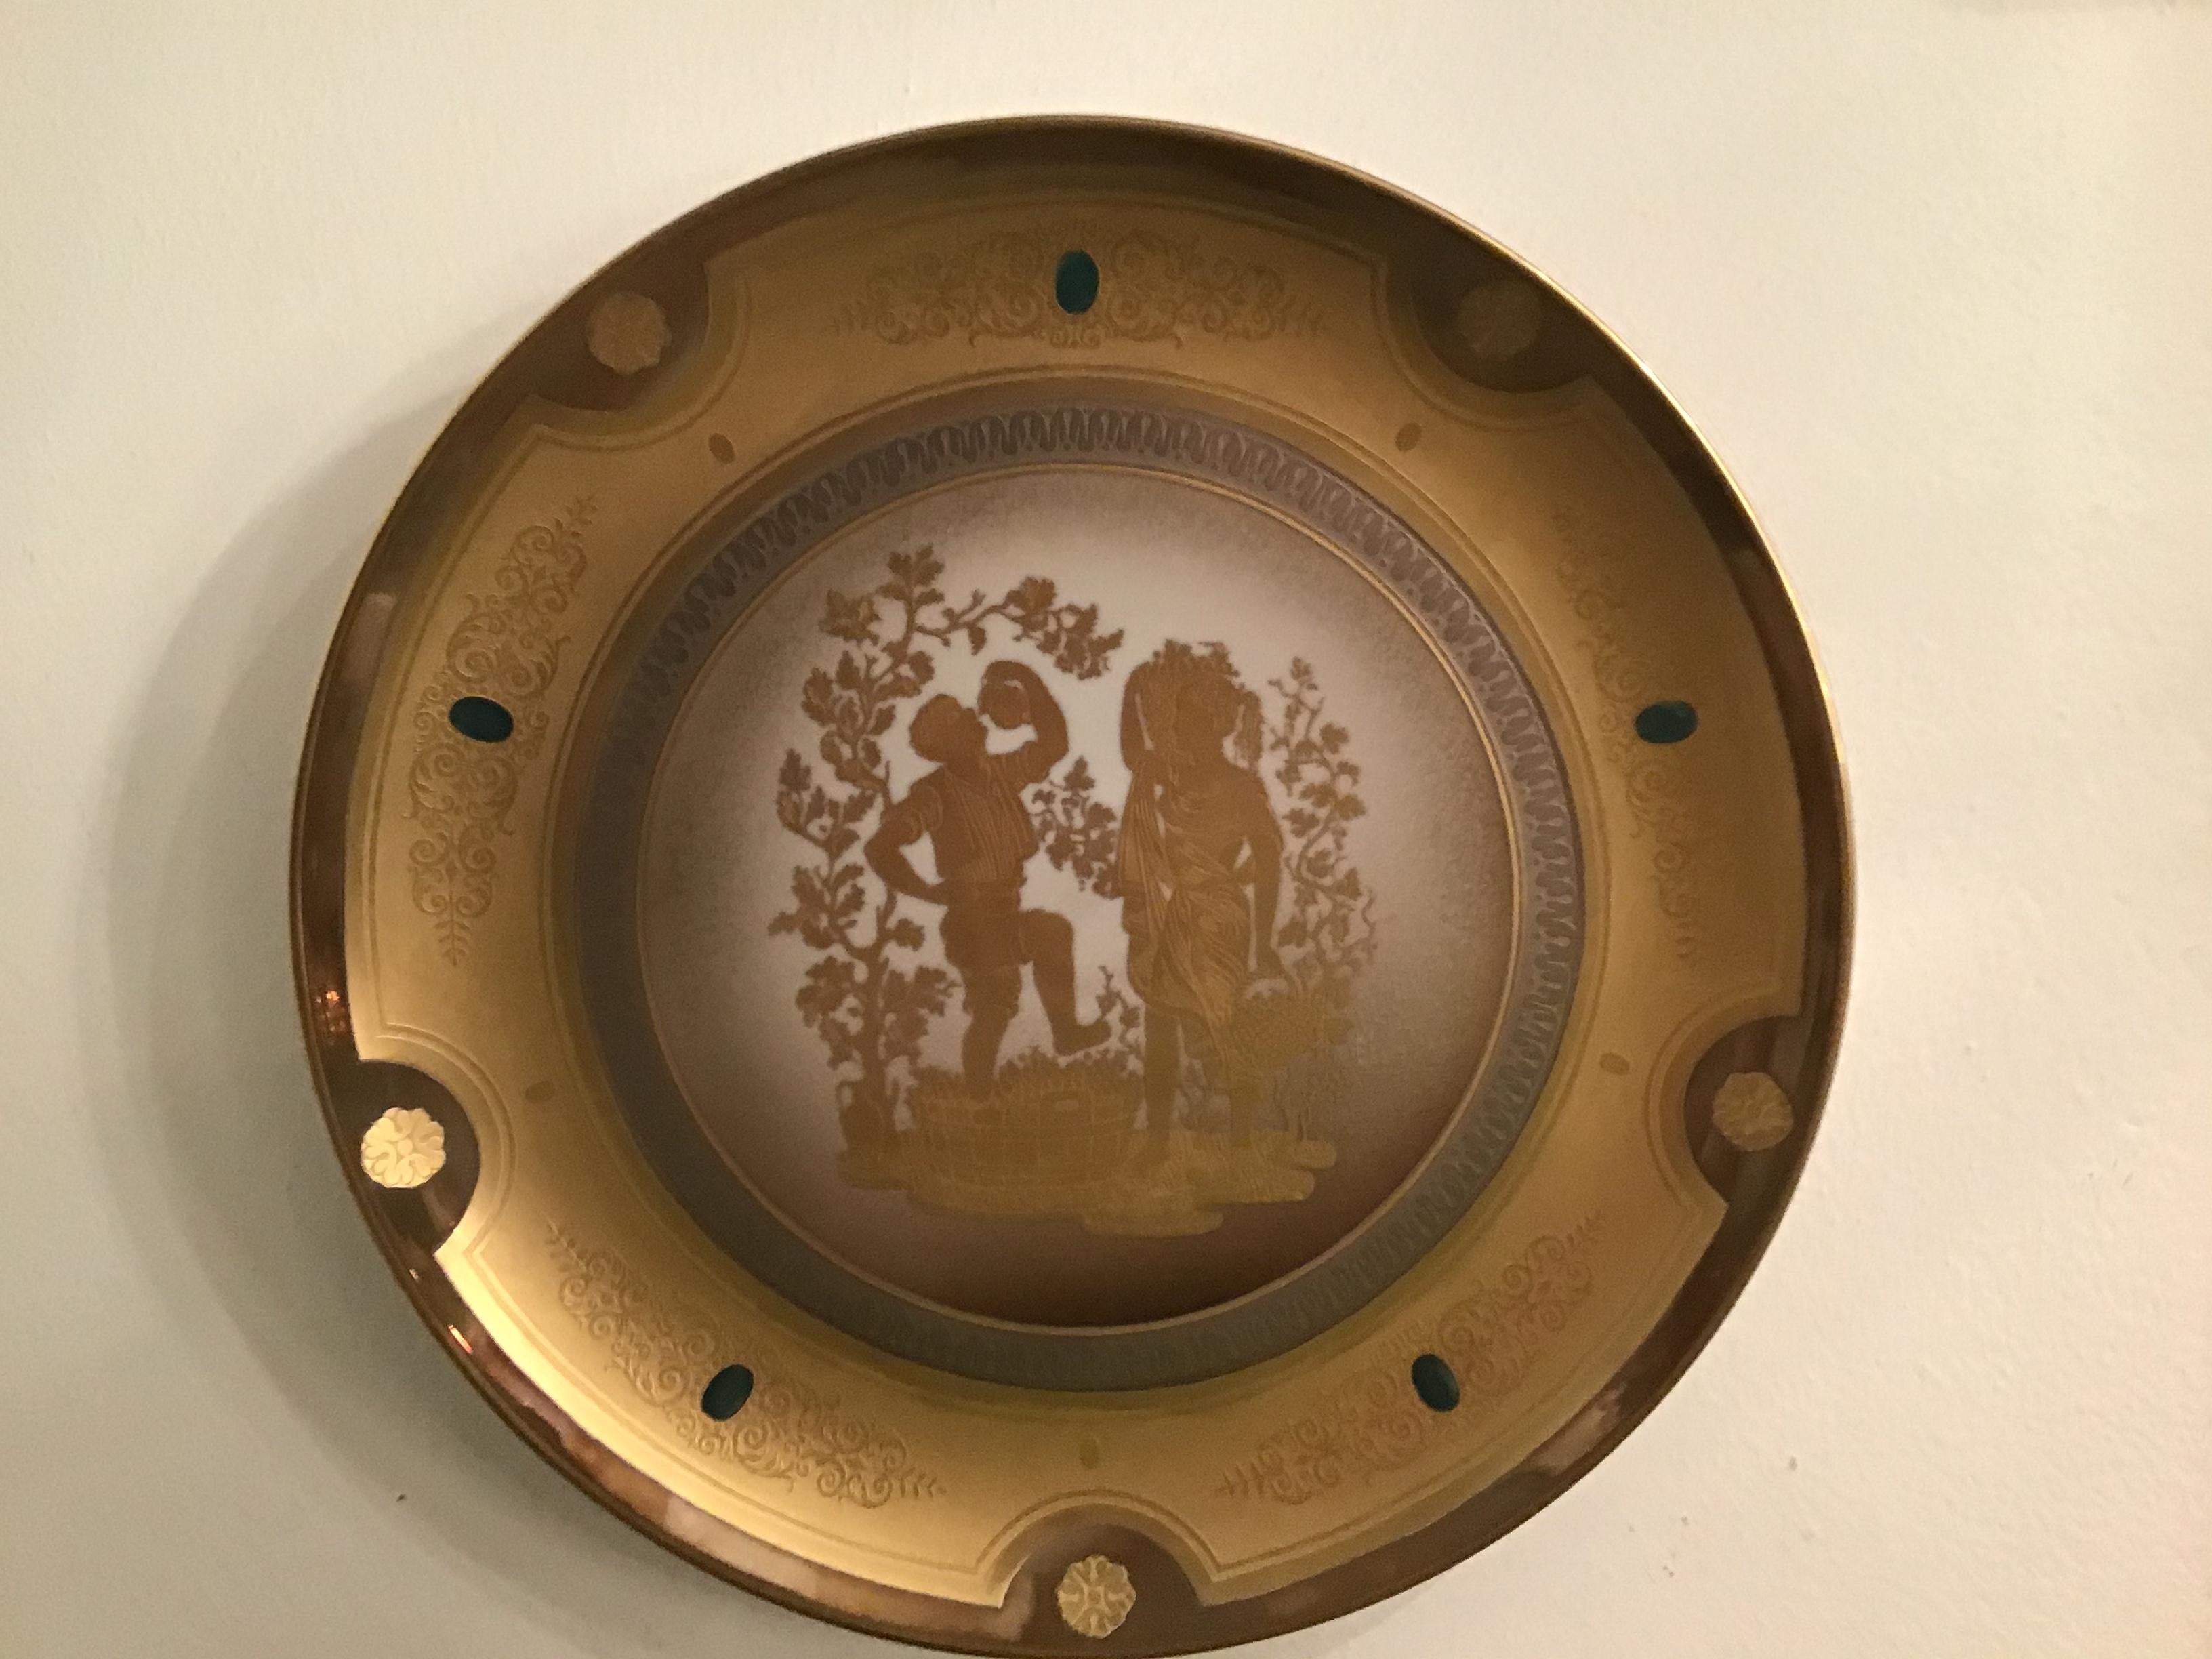 Morbelli Porcelain Wall Plate Gold “ Autunno”, 1960, Italy For Sale 12